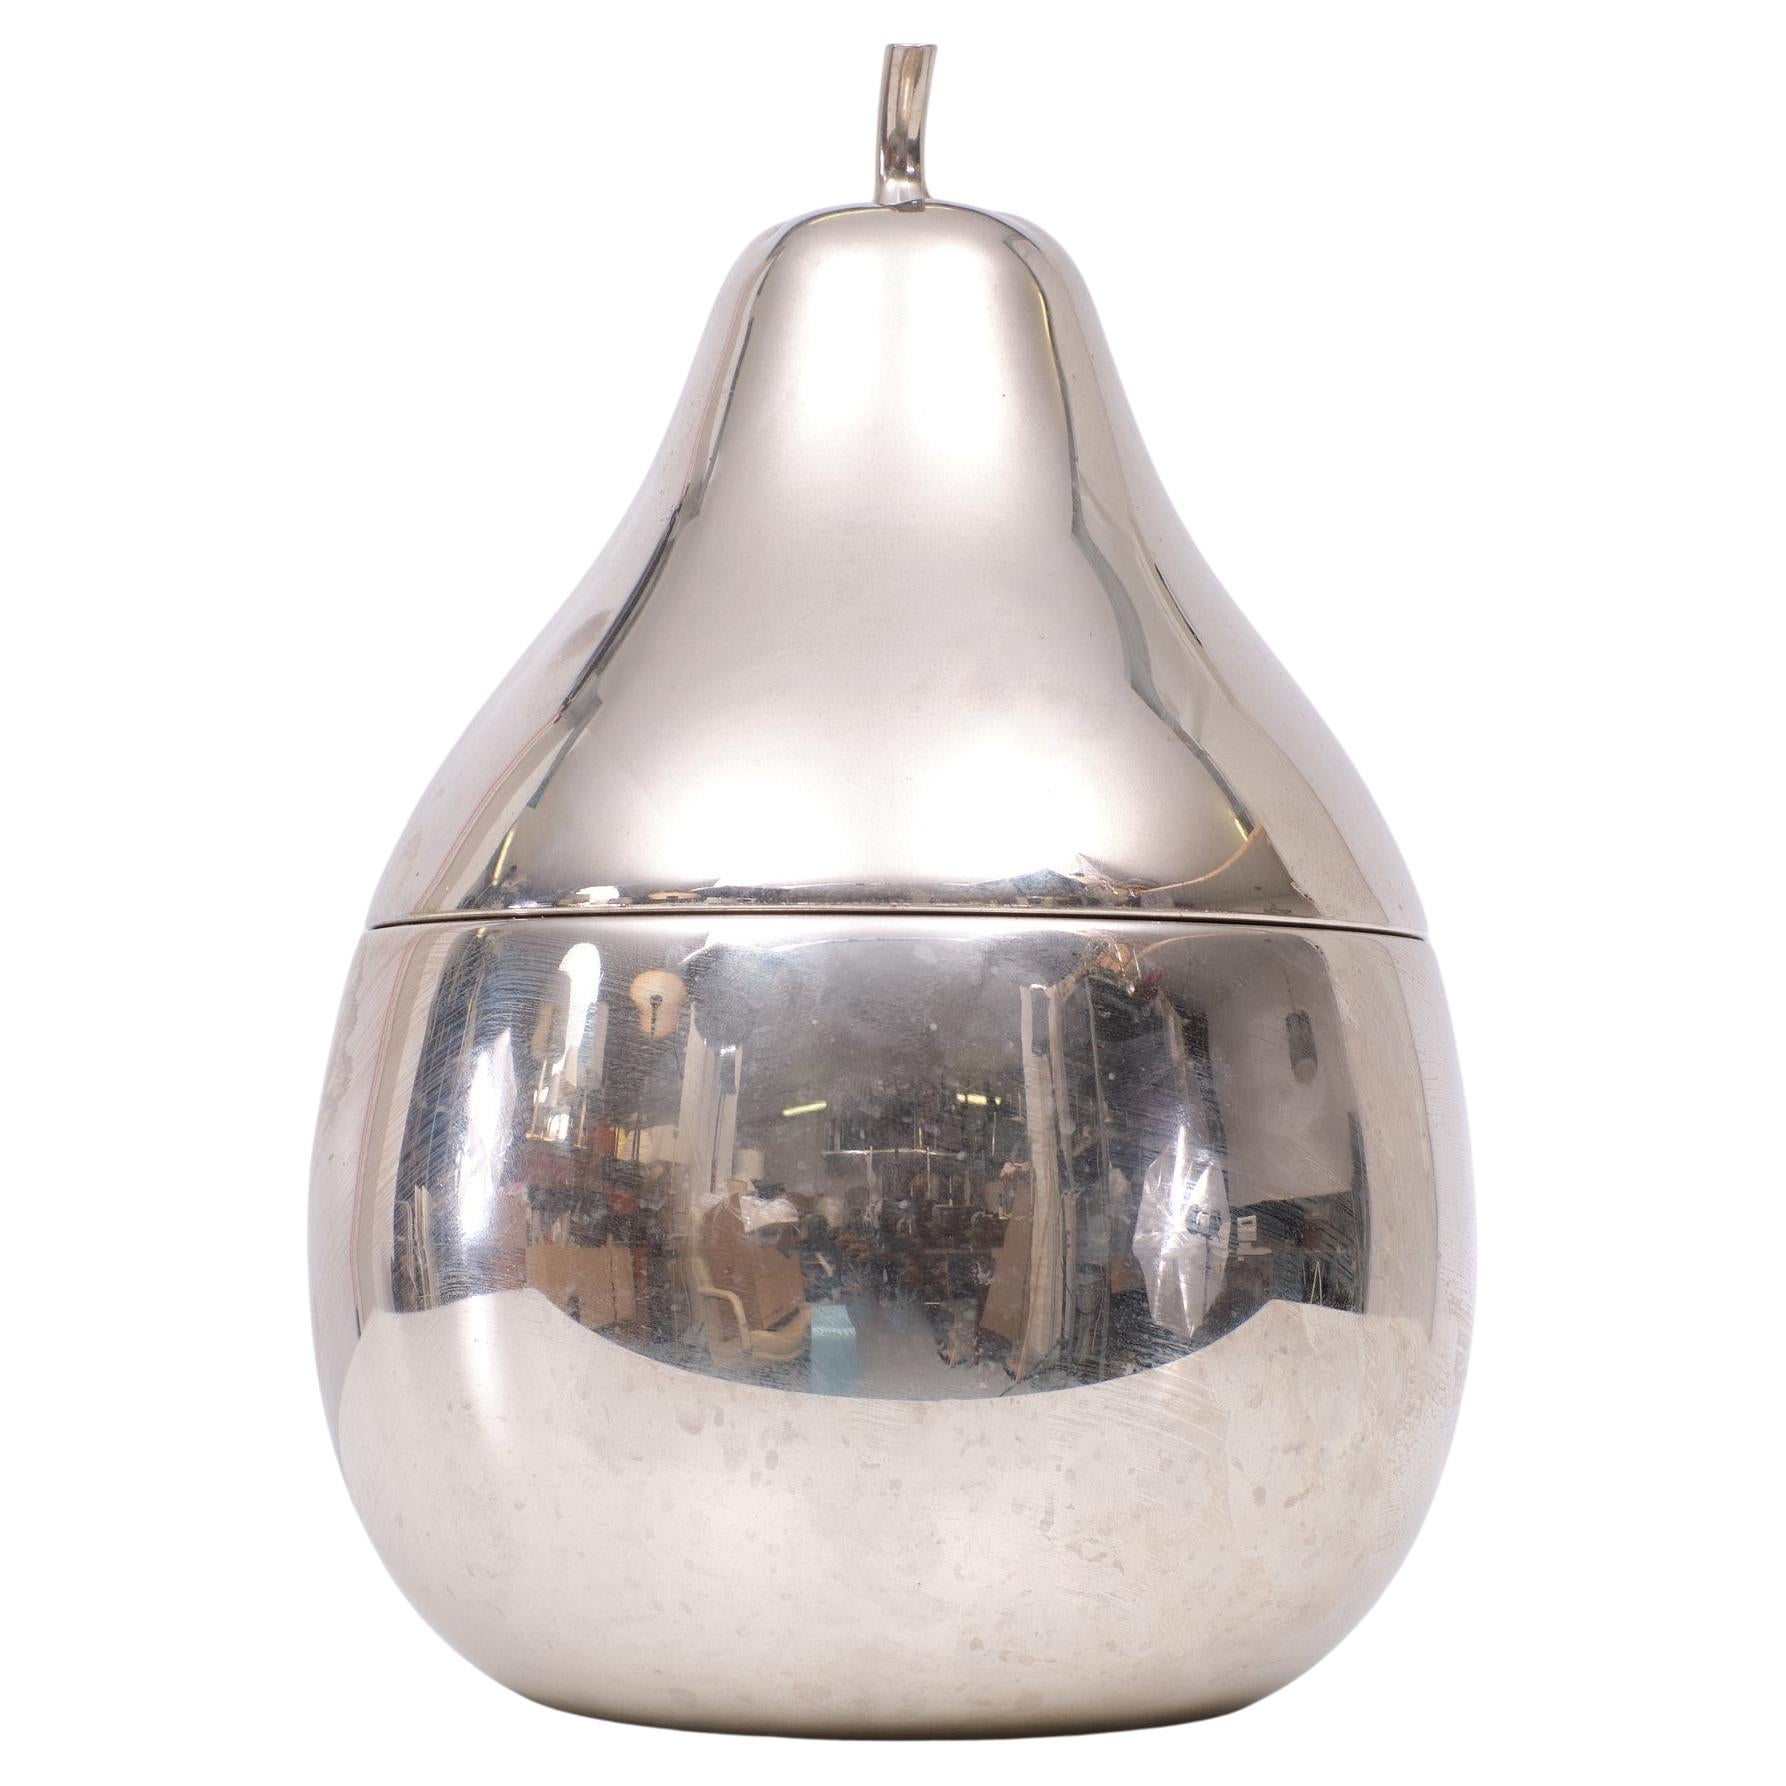 vintage Italian ice bucket ,in the shape of a pear .polished aluminum 
very nice bar accessorize . plastic inside to keep the ice cubes cool . 
Italy 1970s   